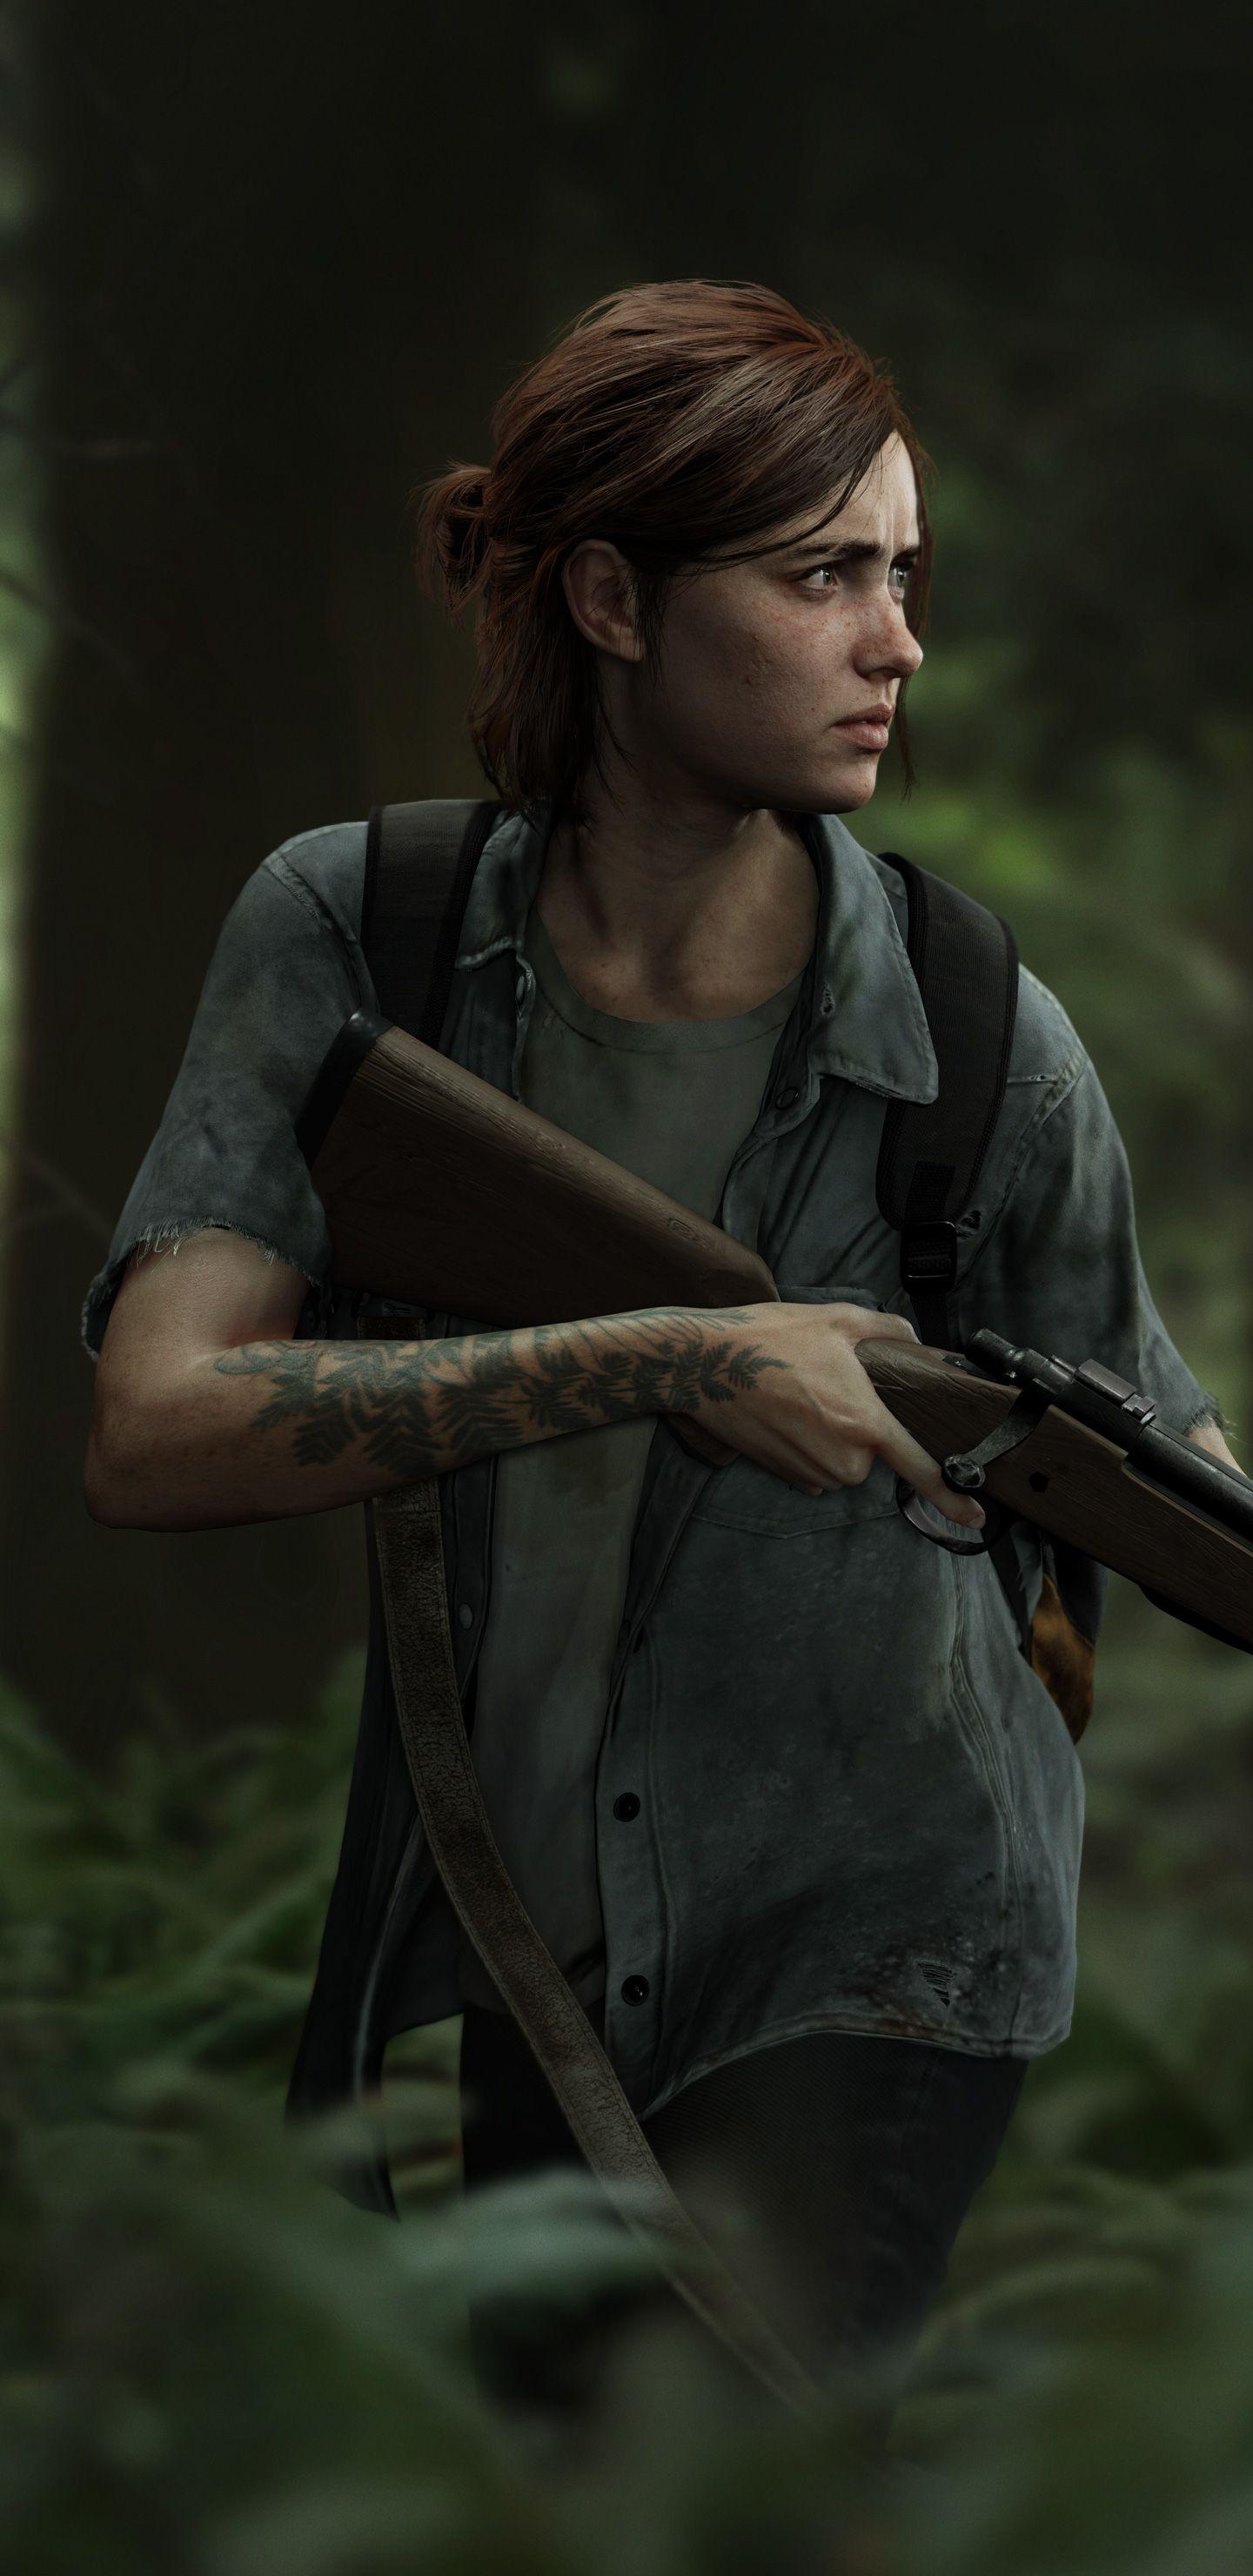 Ellie from The Last of Us Part II (1440x2960) #Music #IndieArtist